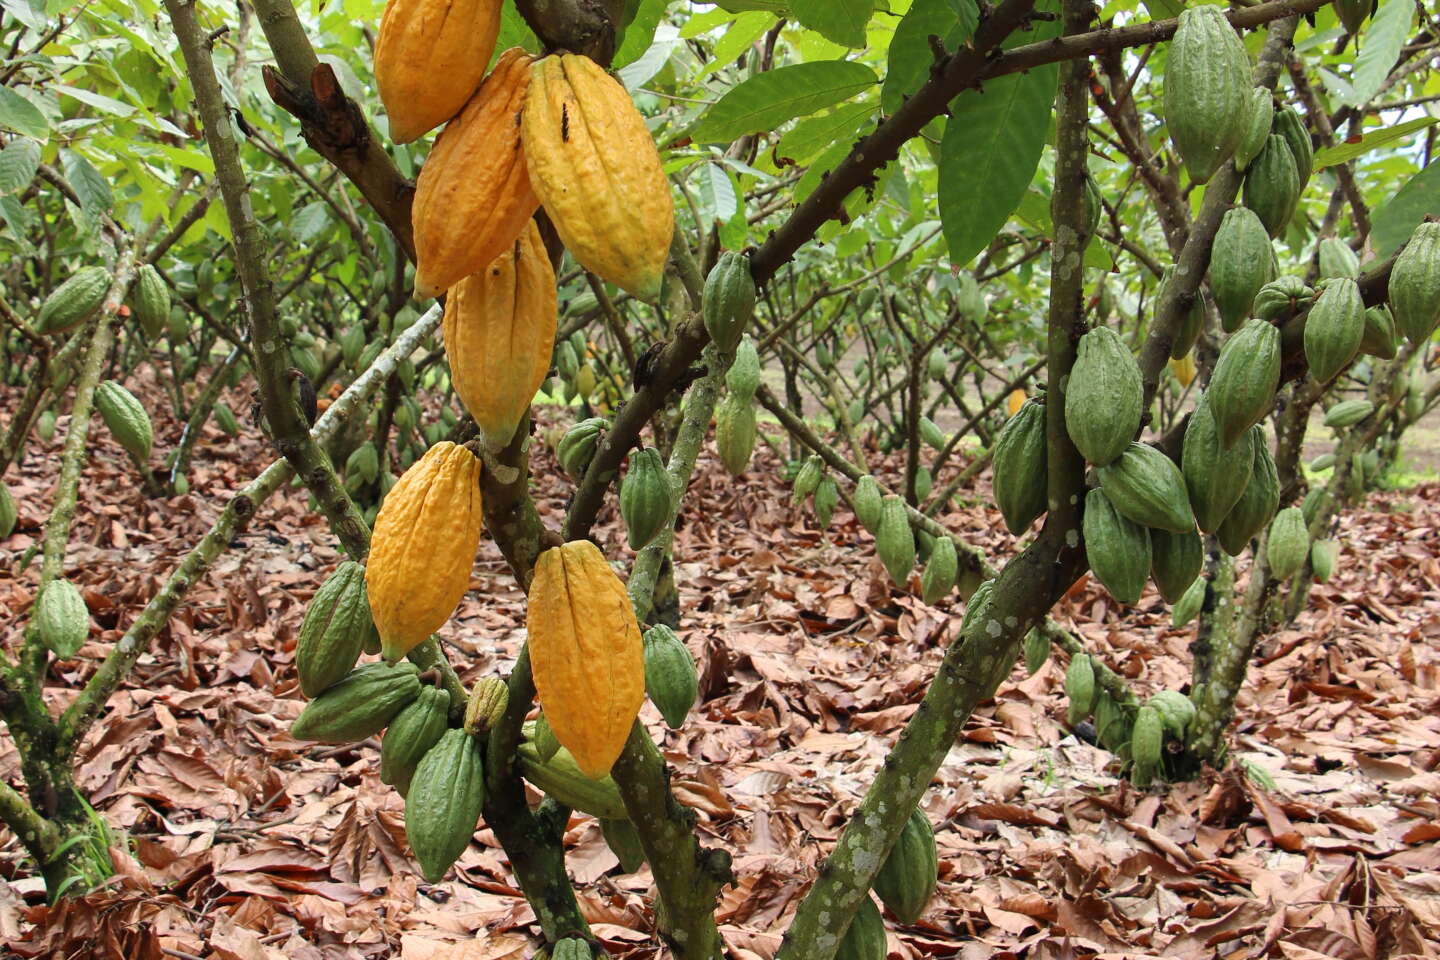 The mystery of the spread of cocoa across South America, more than 5,000 years ago, has finally been solved